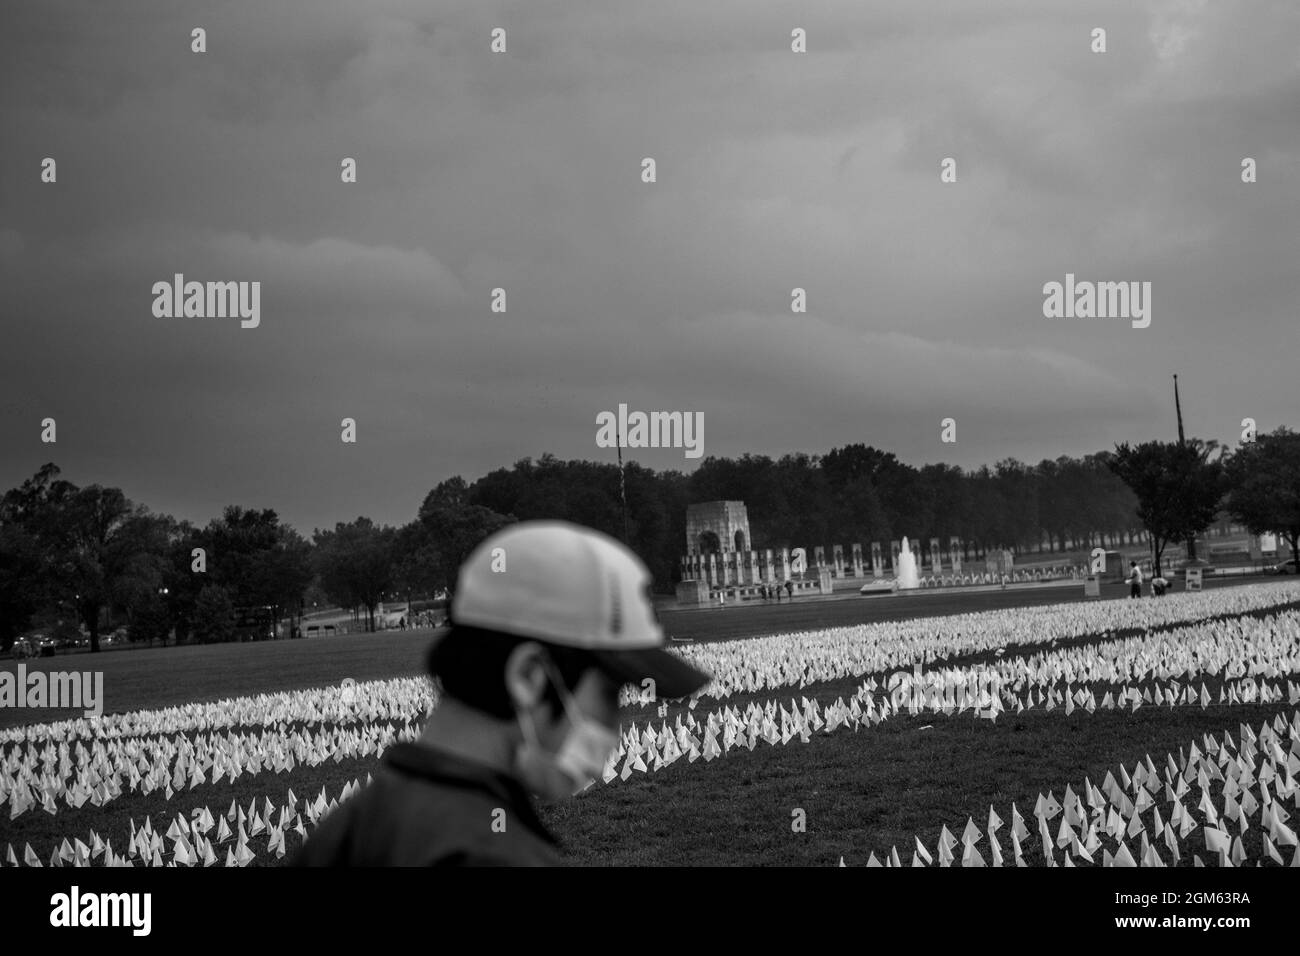 A man works at installing some of the 660,000 white flags, representing the number of US lives lost to Covid-19, on the National Mall in Washington, DC, Thursday, September 16, 2021. The project, by artist Suzanne Brennan Firstenberg, titled âIn America: Rememberâ, will be on display September 17, 2021 through October 3, 2021. Credit: Rod Lamkey/CNP Stock Photo